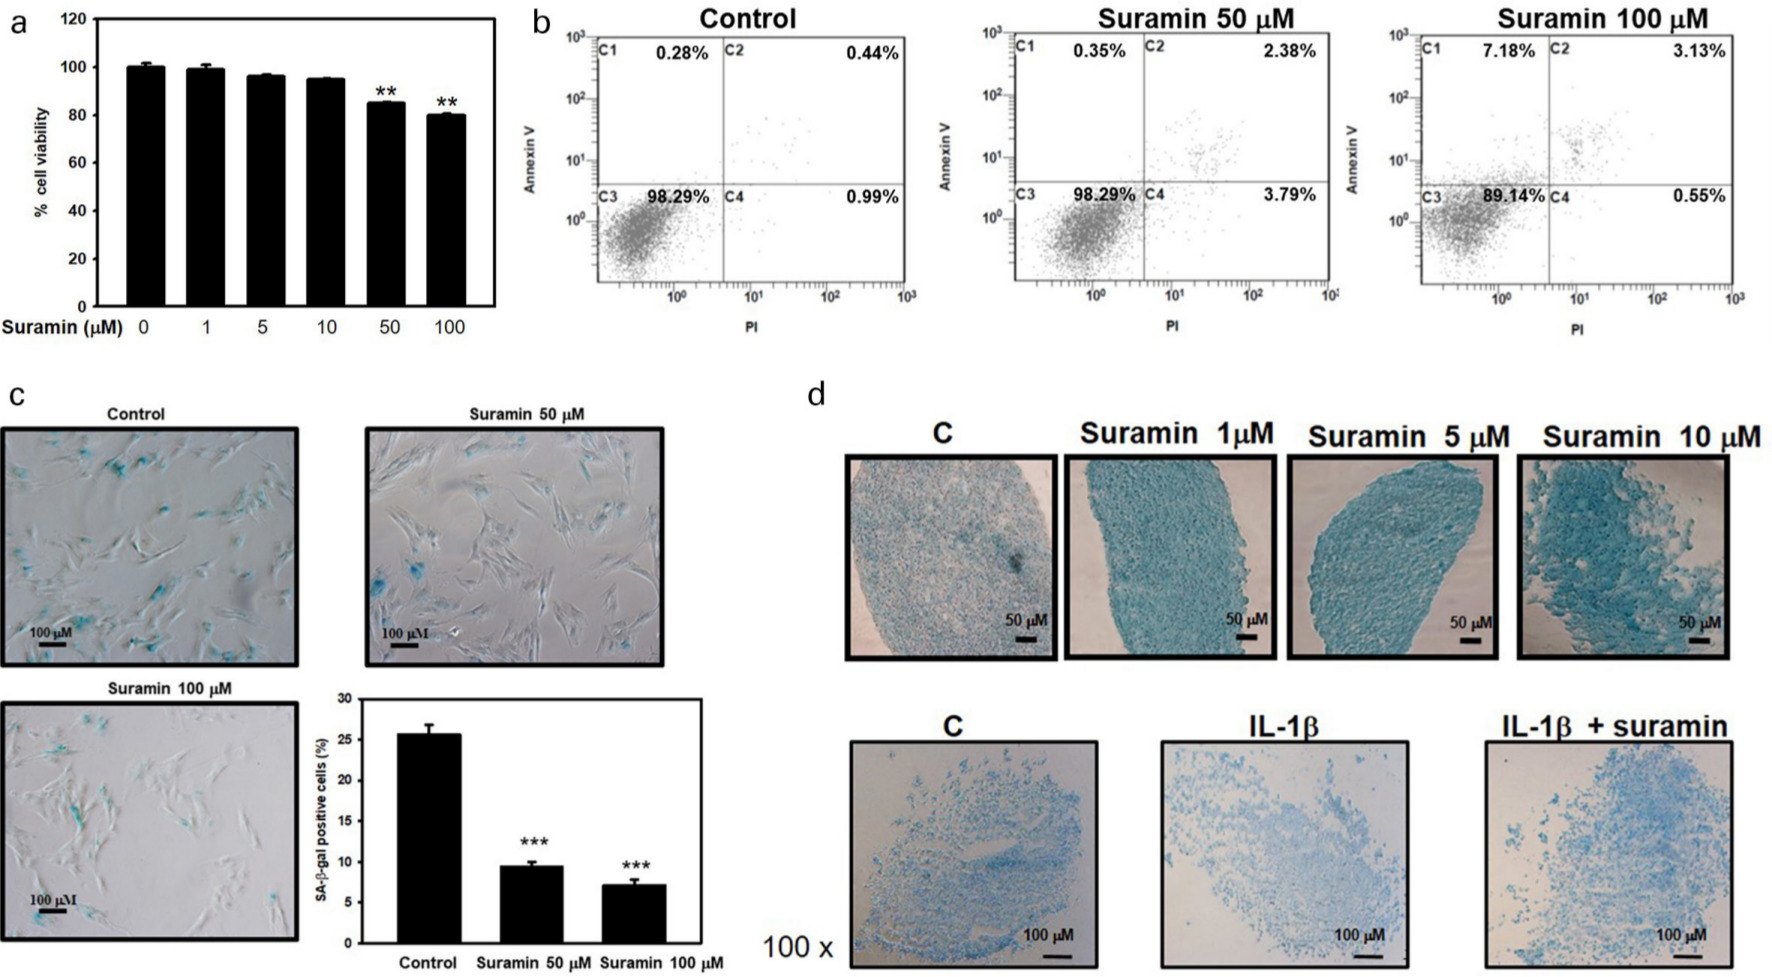 Fig. 1 
            Effect of suramin on cell viability and proteoglycan and glycosaminoglycan (GAG) expression in nucleus pulposus (NP) cells. a) The viability of suramin-treated NP cells, as measured by 3-(4,5-dimethylthiazol-2-yl)-2,5-diphenyltetrazolium bromide (MTT) assay at 72 hours (n = 3). b) NP cells were treated with or without suramin for 72 hours. The percentage of Annexin V/propidium iodide (PI)-positive cells was shown represented in the boxed region (n = 3). c) The NP cells were treated with various doses of suramin as indicated for 72 hours and the senescence-associated β-galactosidase (SA-β-gal) activity was detected. A representative photomicrograph of the SA-β-gal assay is shown. The percentages of β-galactosidase-positive cells (n each group were compared and are illustrated in the histogram (n = 6 in each experiment). d) Alcian blue staining was used to examine the effects of interleukin (IL)-1β and suramin on glycosaminoglycan expression in pellet culture of NP cells (n = 3). **p < 0.01, ***p < 0.001.
          